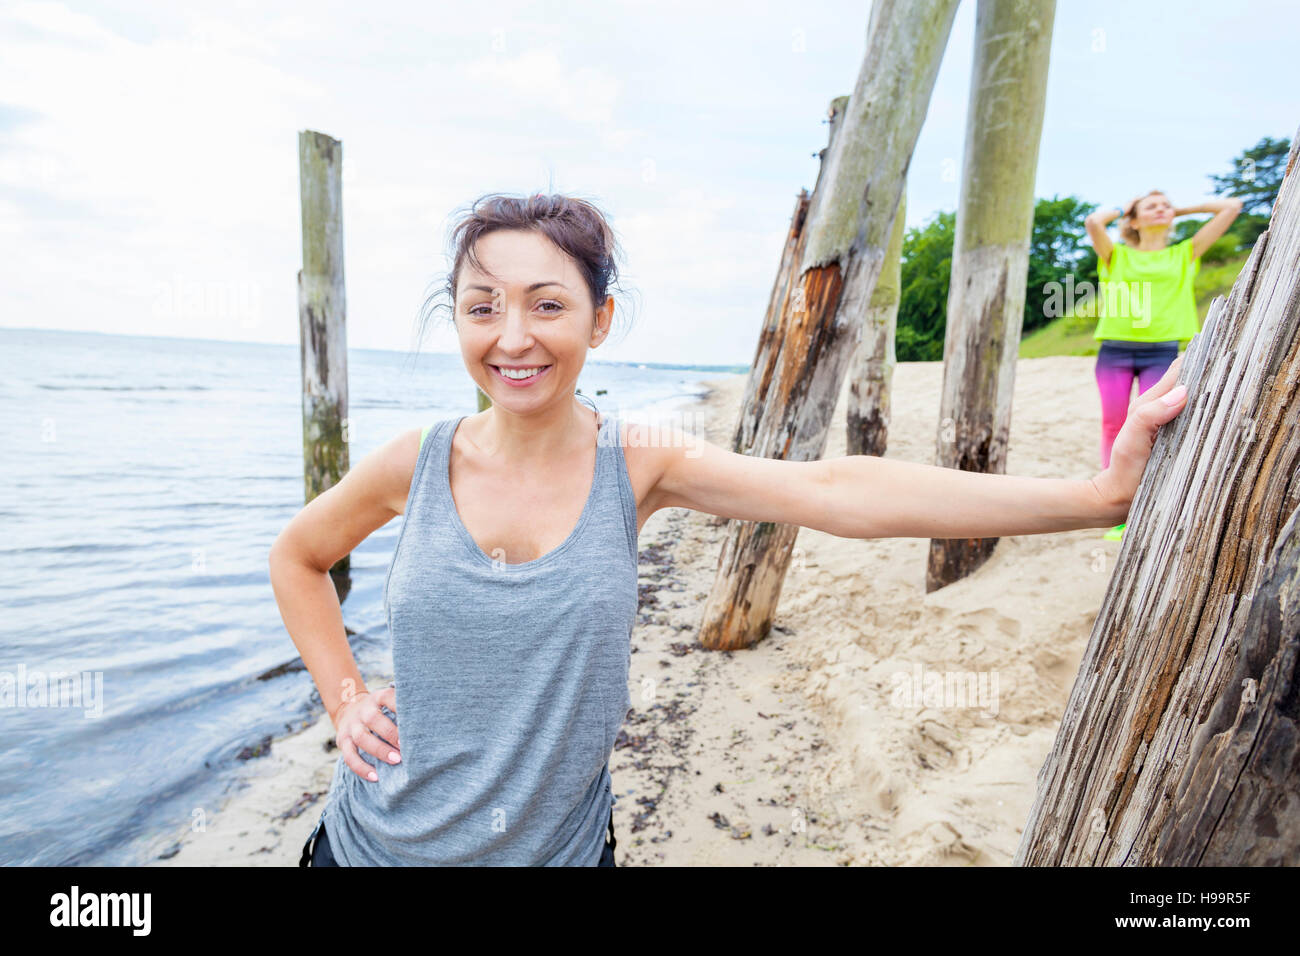 Woman in tank top on beach leaning against wooden post Stock Photo